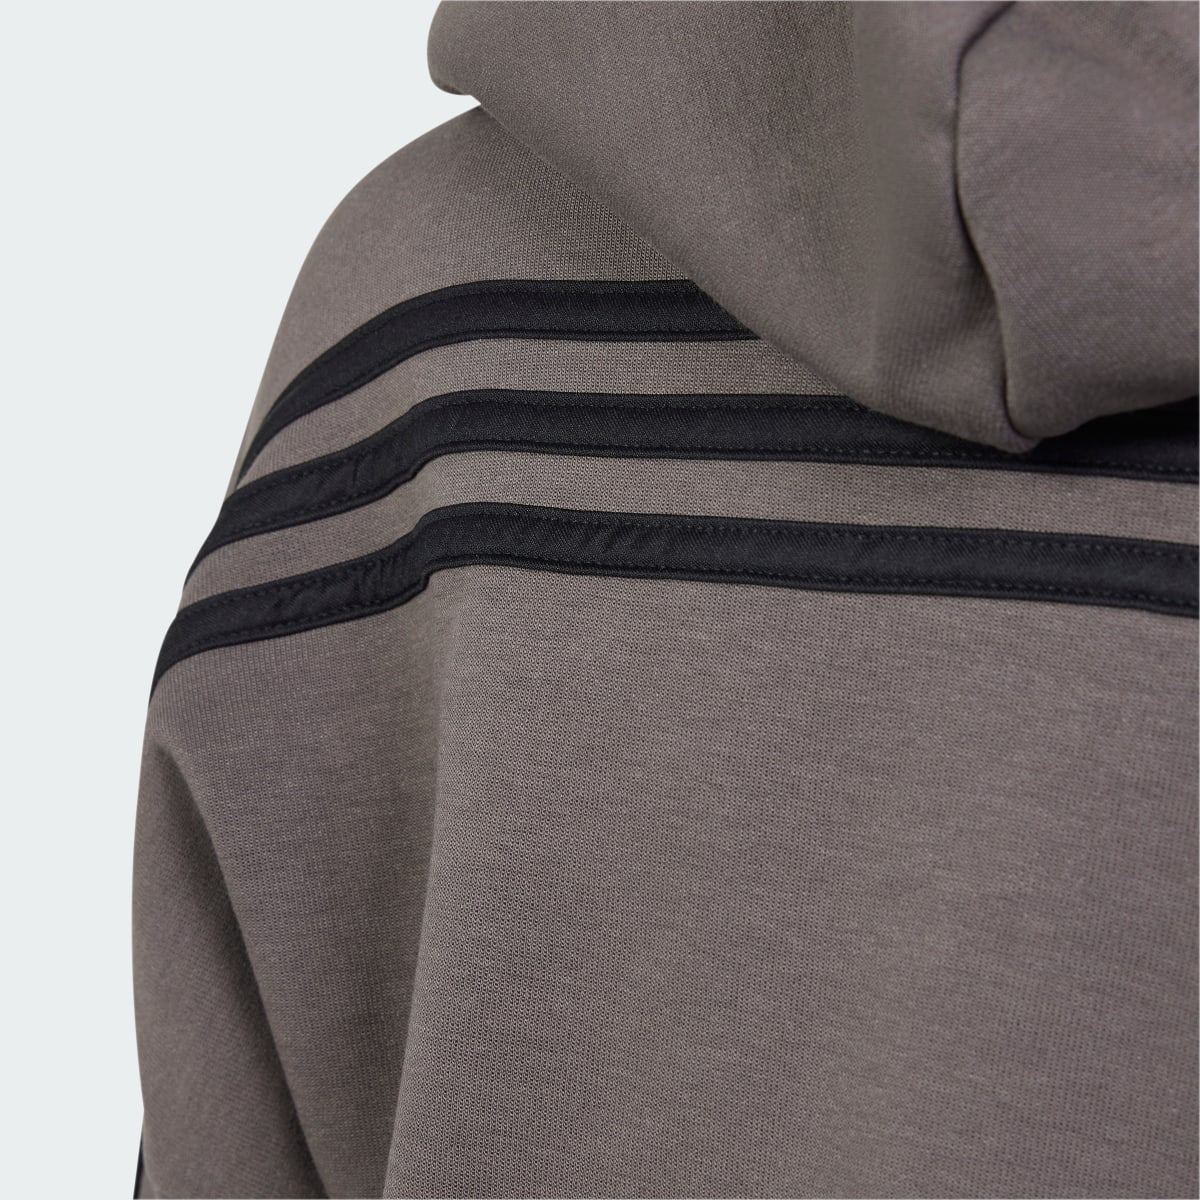 Adidas Future Icons 3-Stripes Full-Zip Hooded Track Top. 5